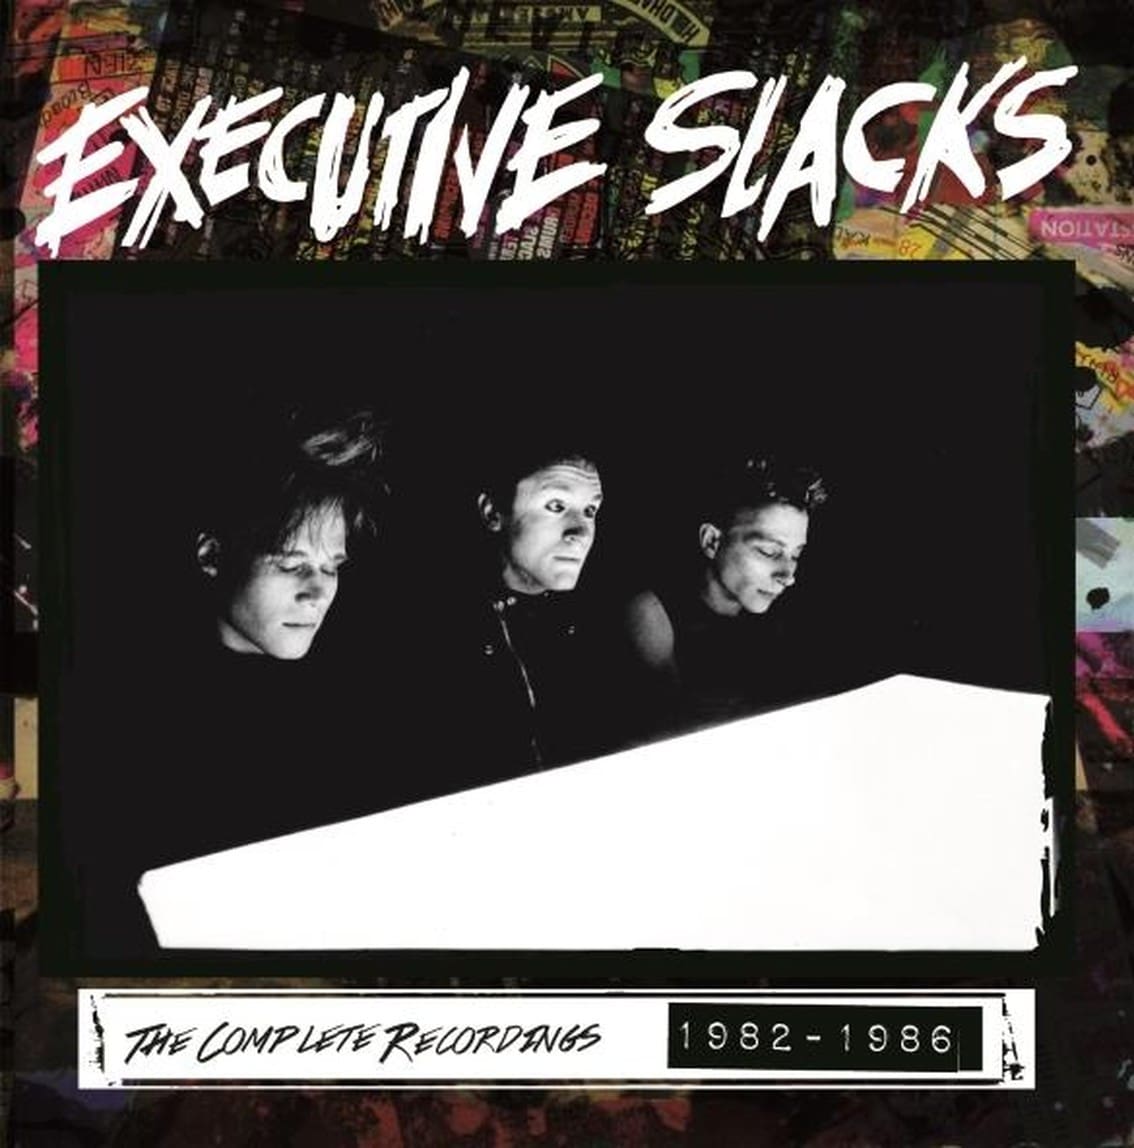 Cleopatra Records to release exhaustive Executive Slacks 2CD collection